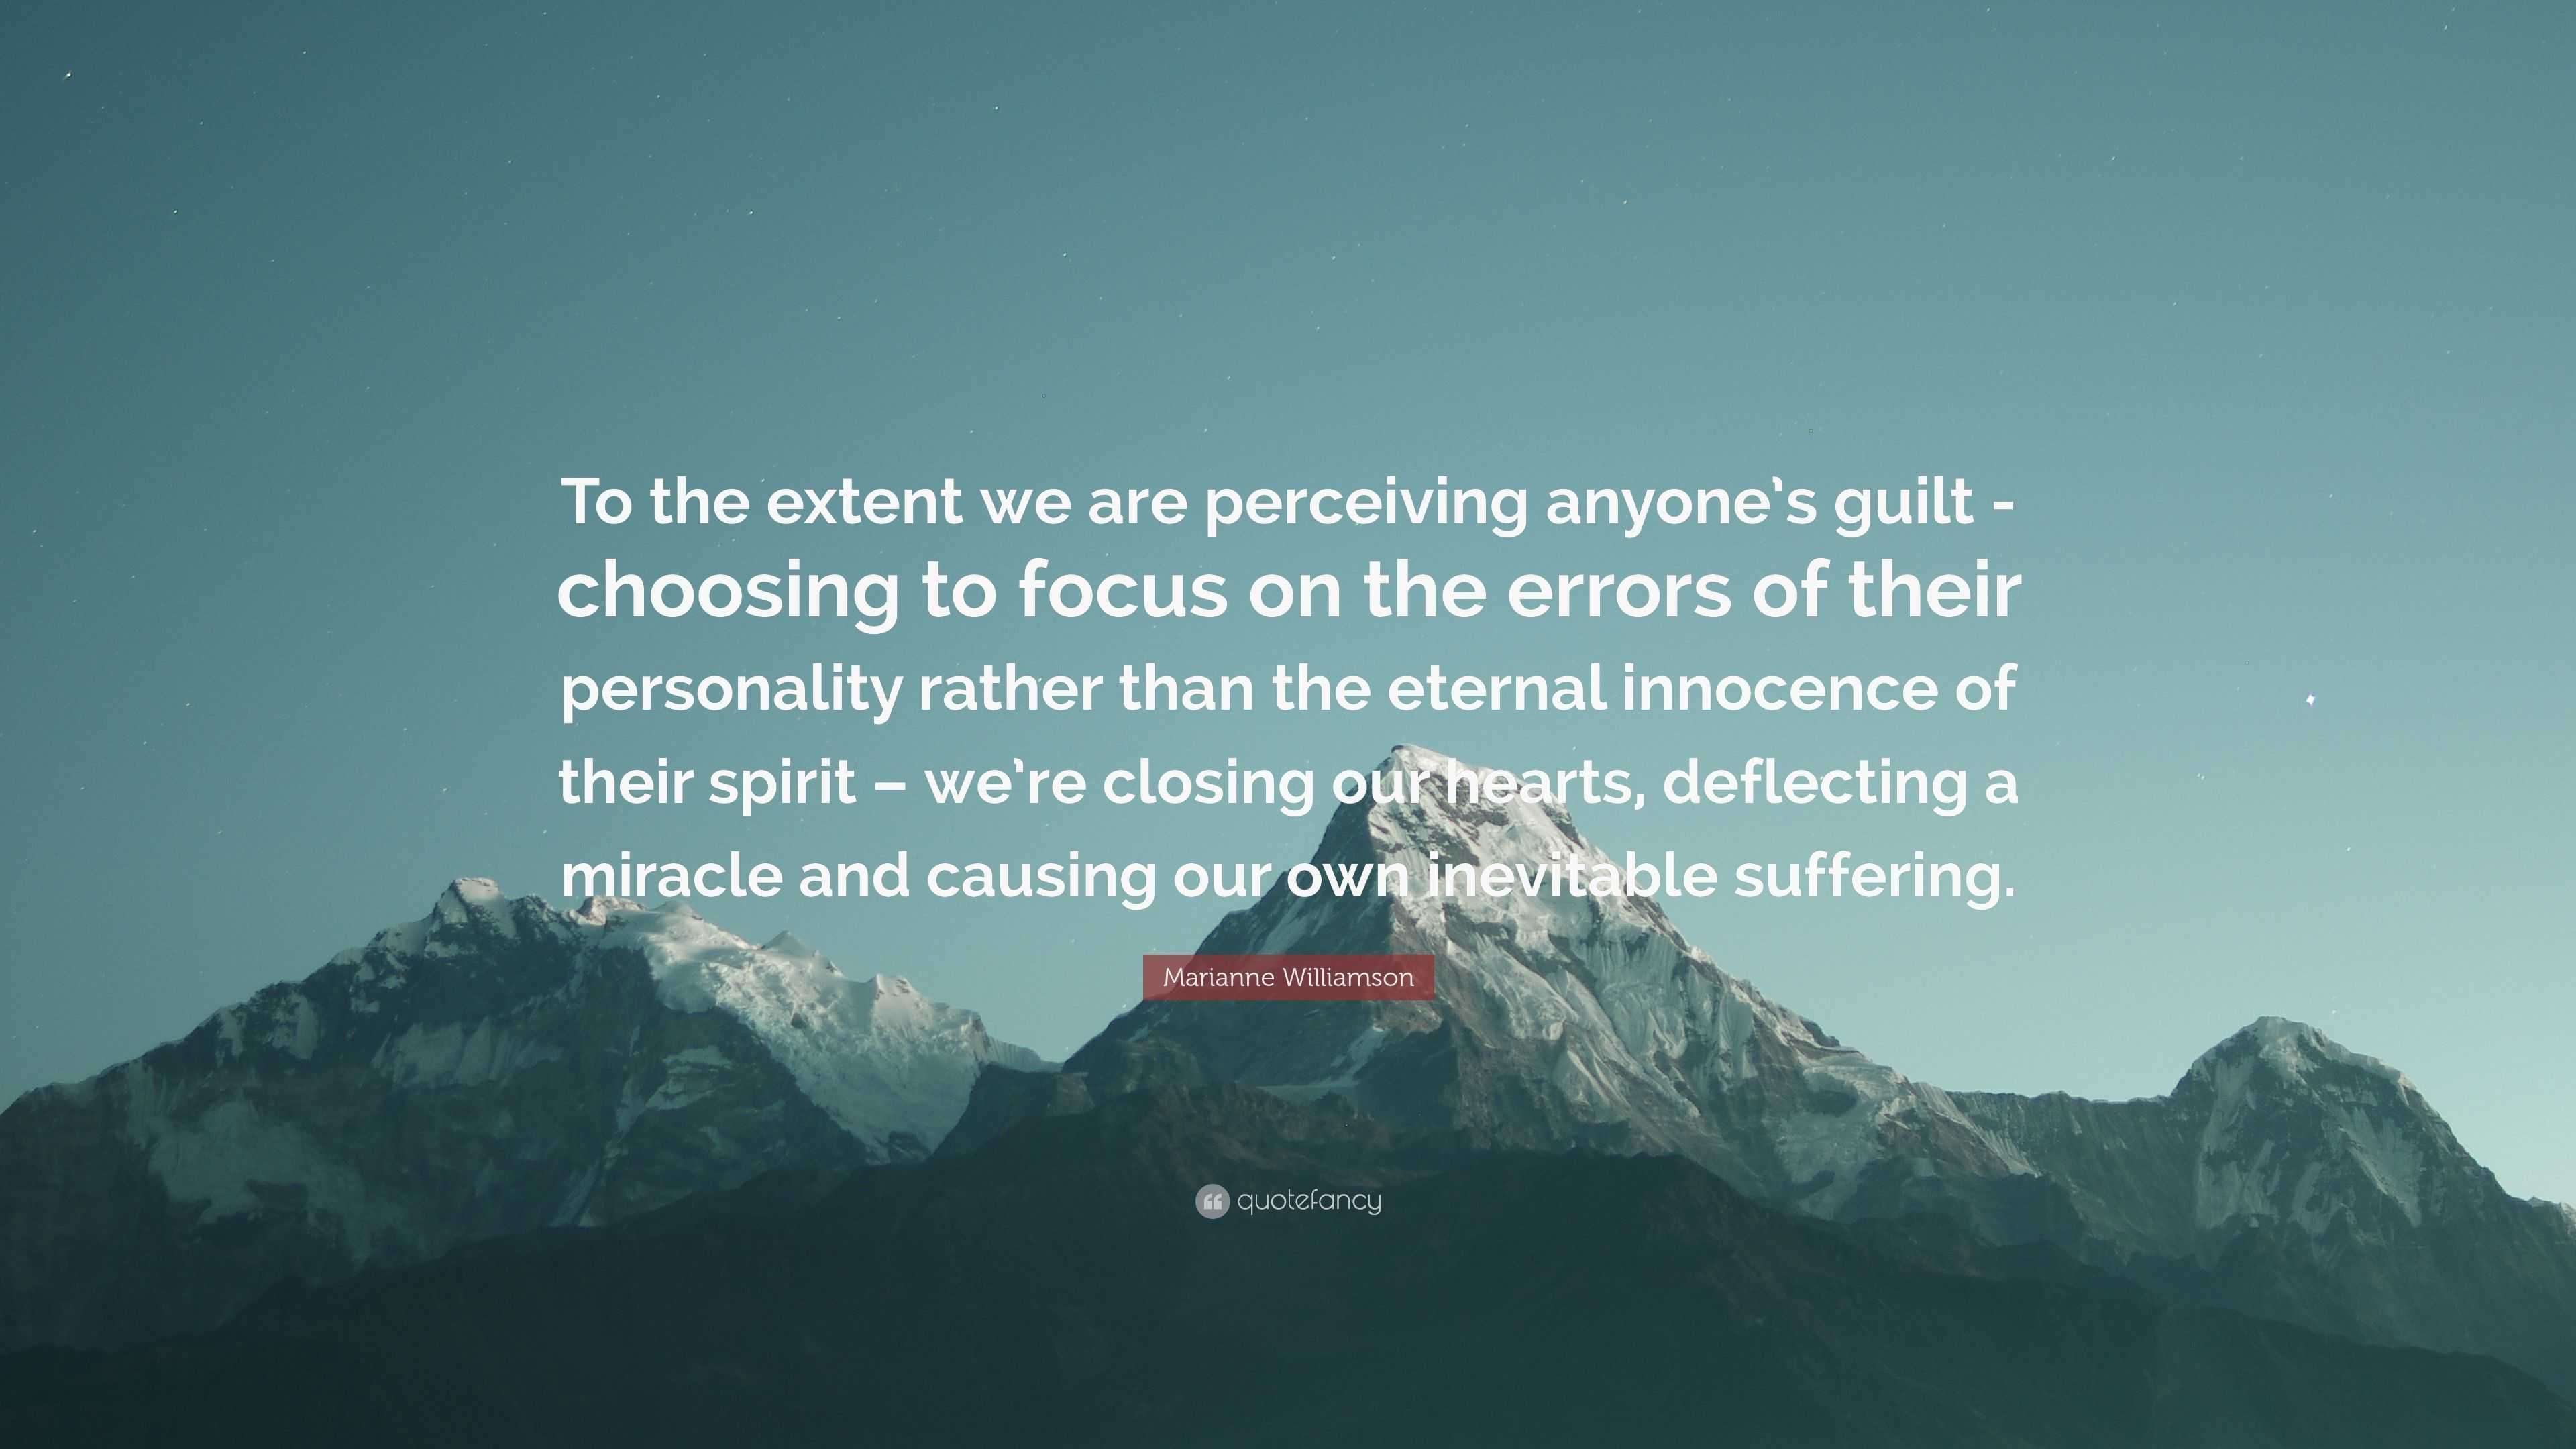 Marianne Williamson Quote: “To the extent we are perceiving anyone's guilt  -choosing to focus on the errors of their personality rather than the  ete”